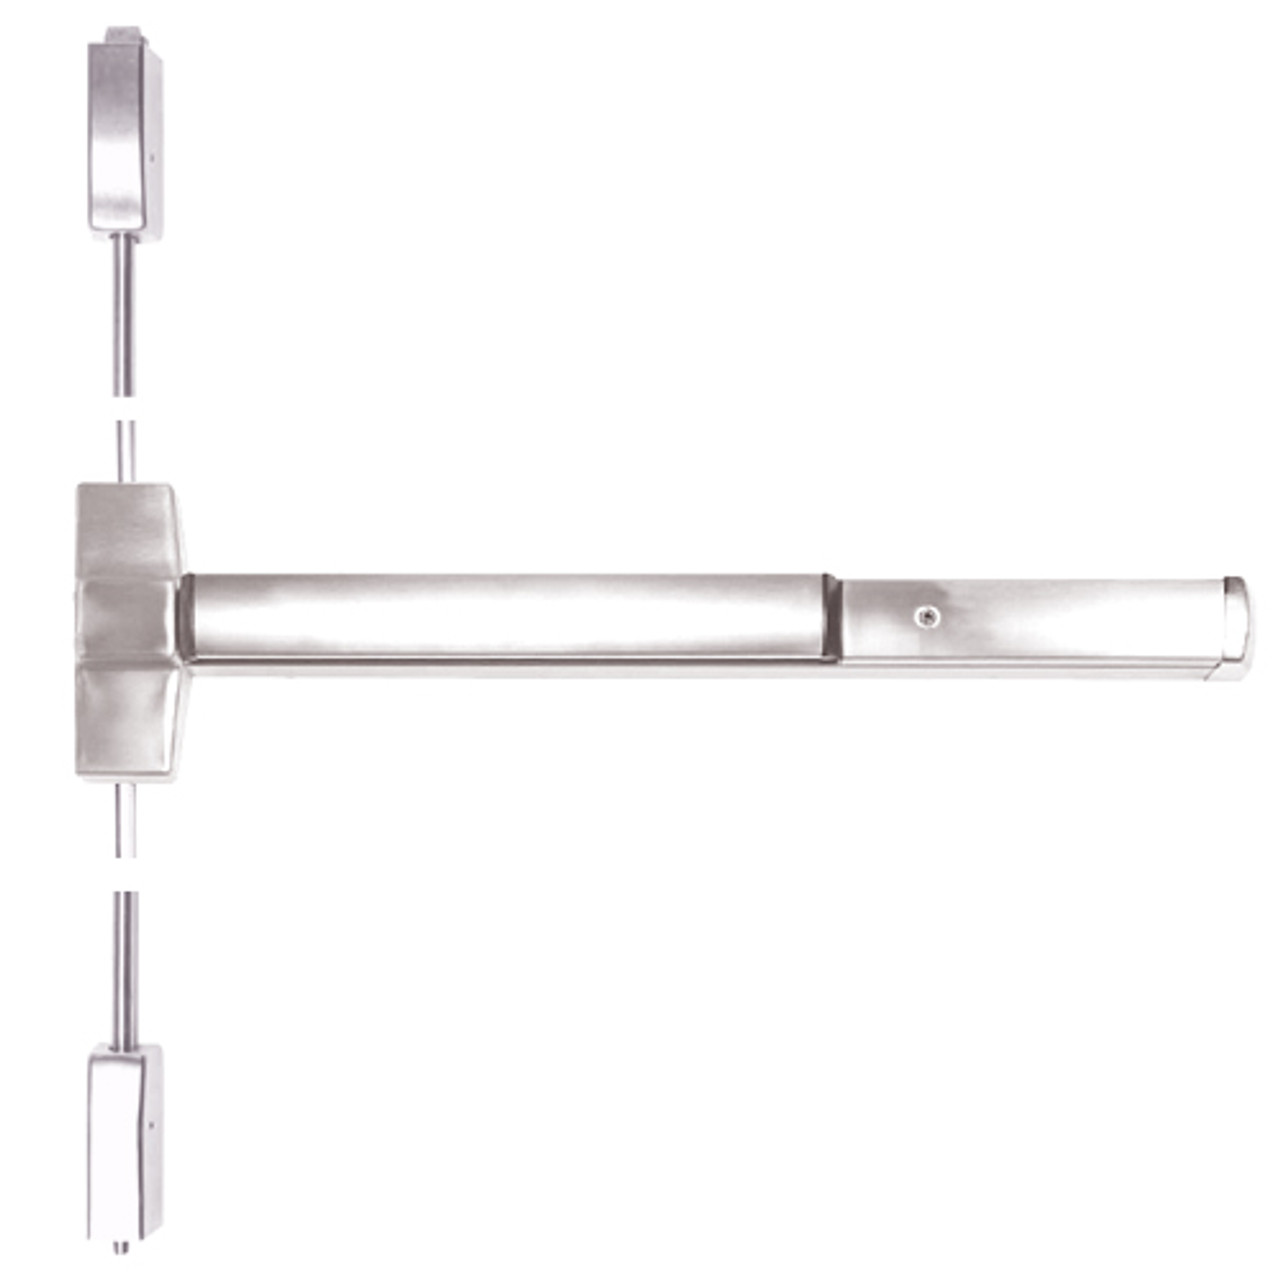 ED5400-629-W048 Corbin ED5400 Series Non Fire Rated Vertical Rod Exit Device in Bright Stainless Steel Finish